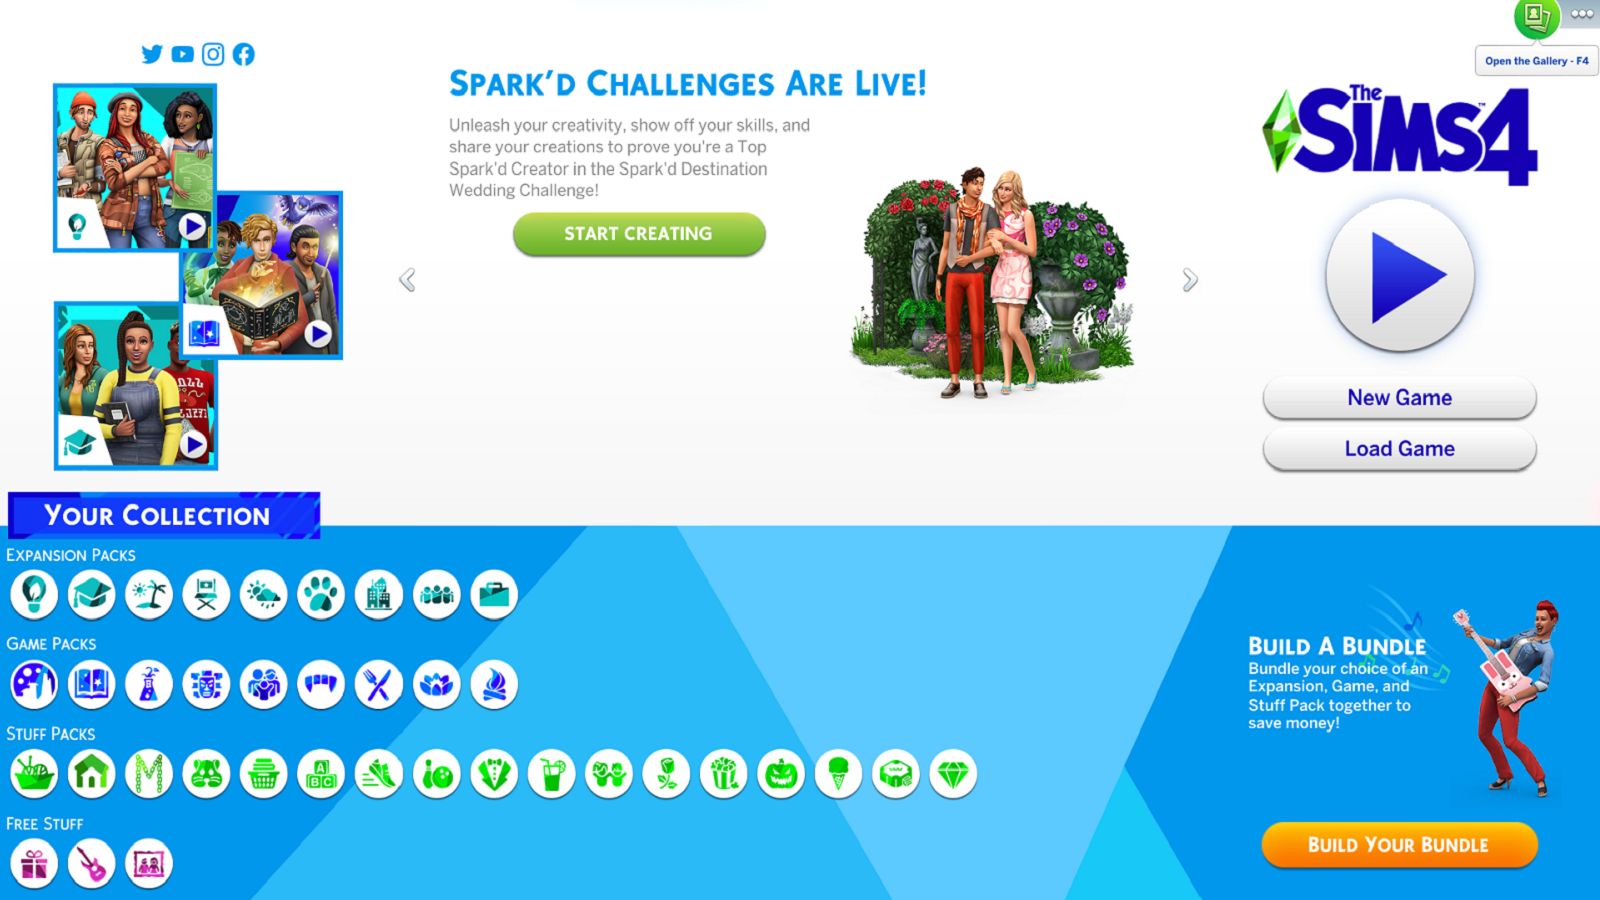 sims 4 free expansion pack codes